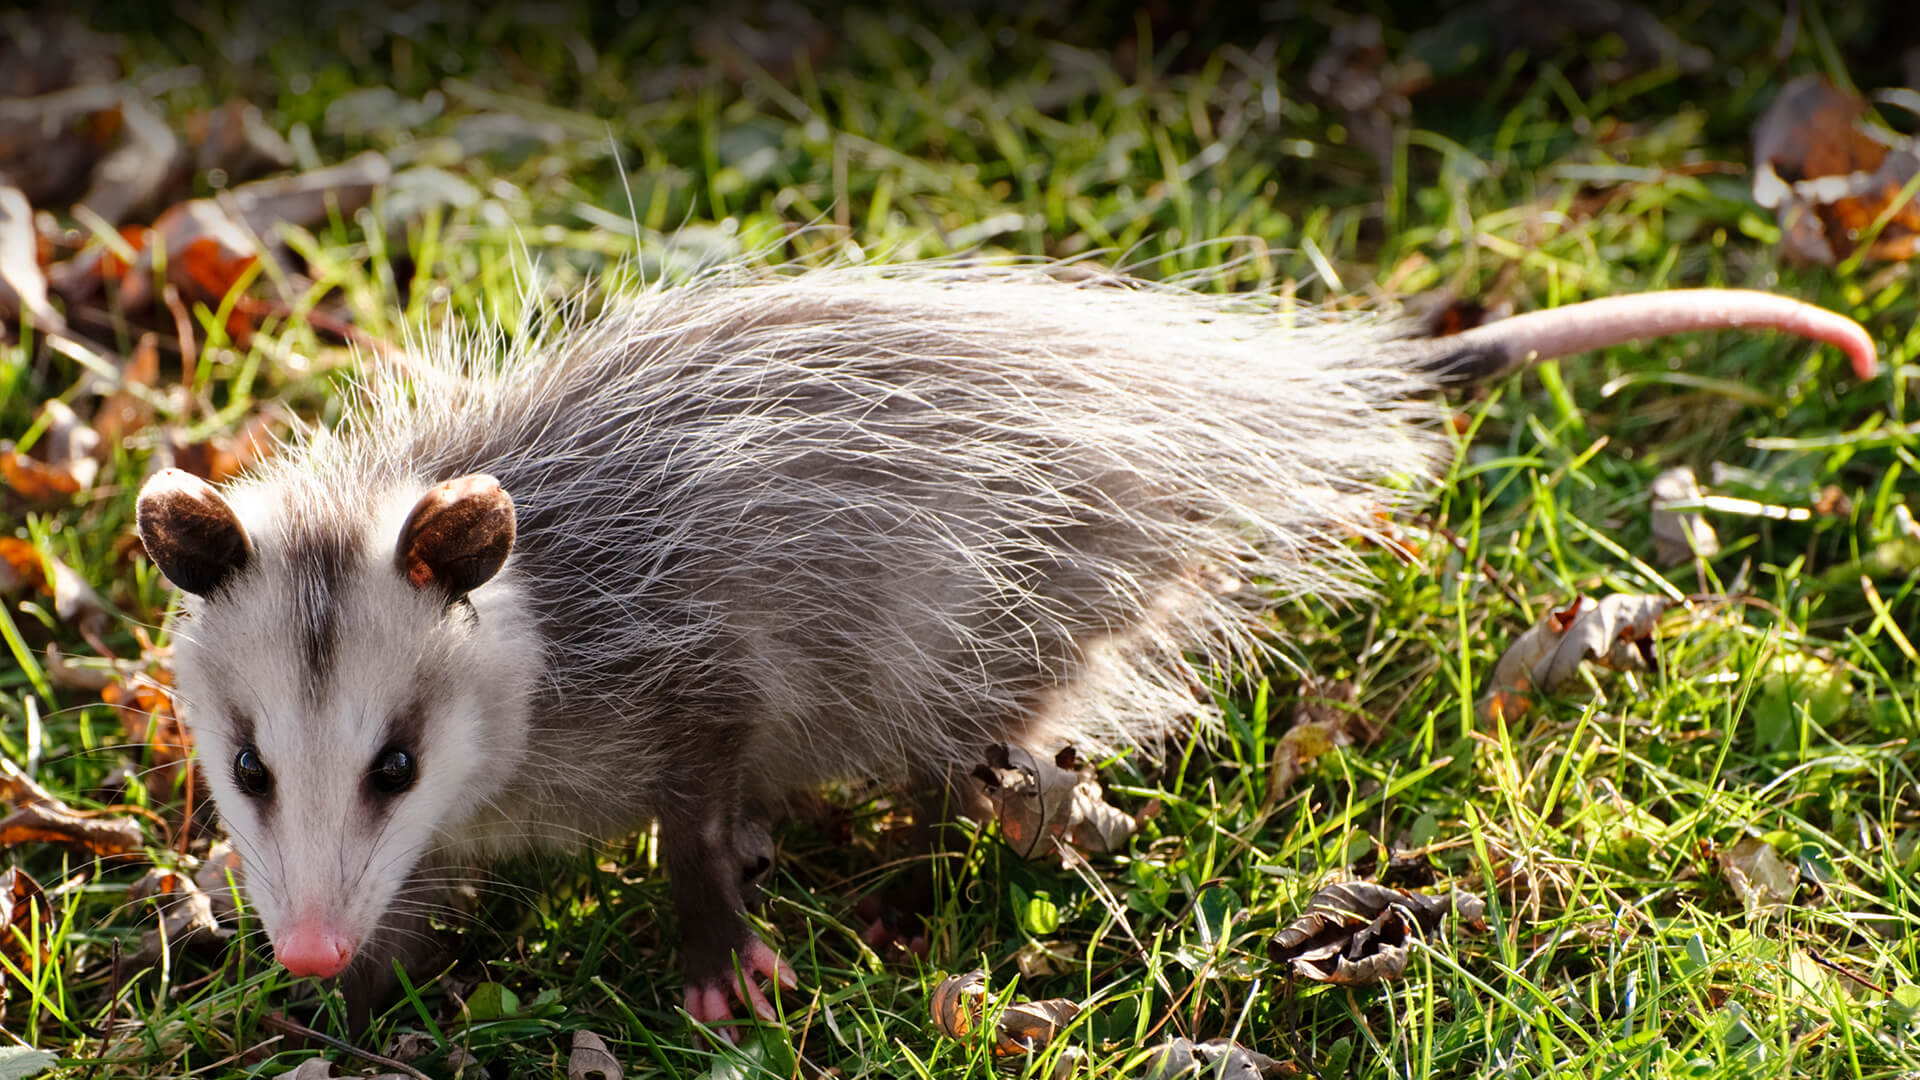 Opposum walking on green grass that is covered with fallen Autumn leaves.